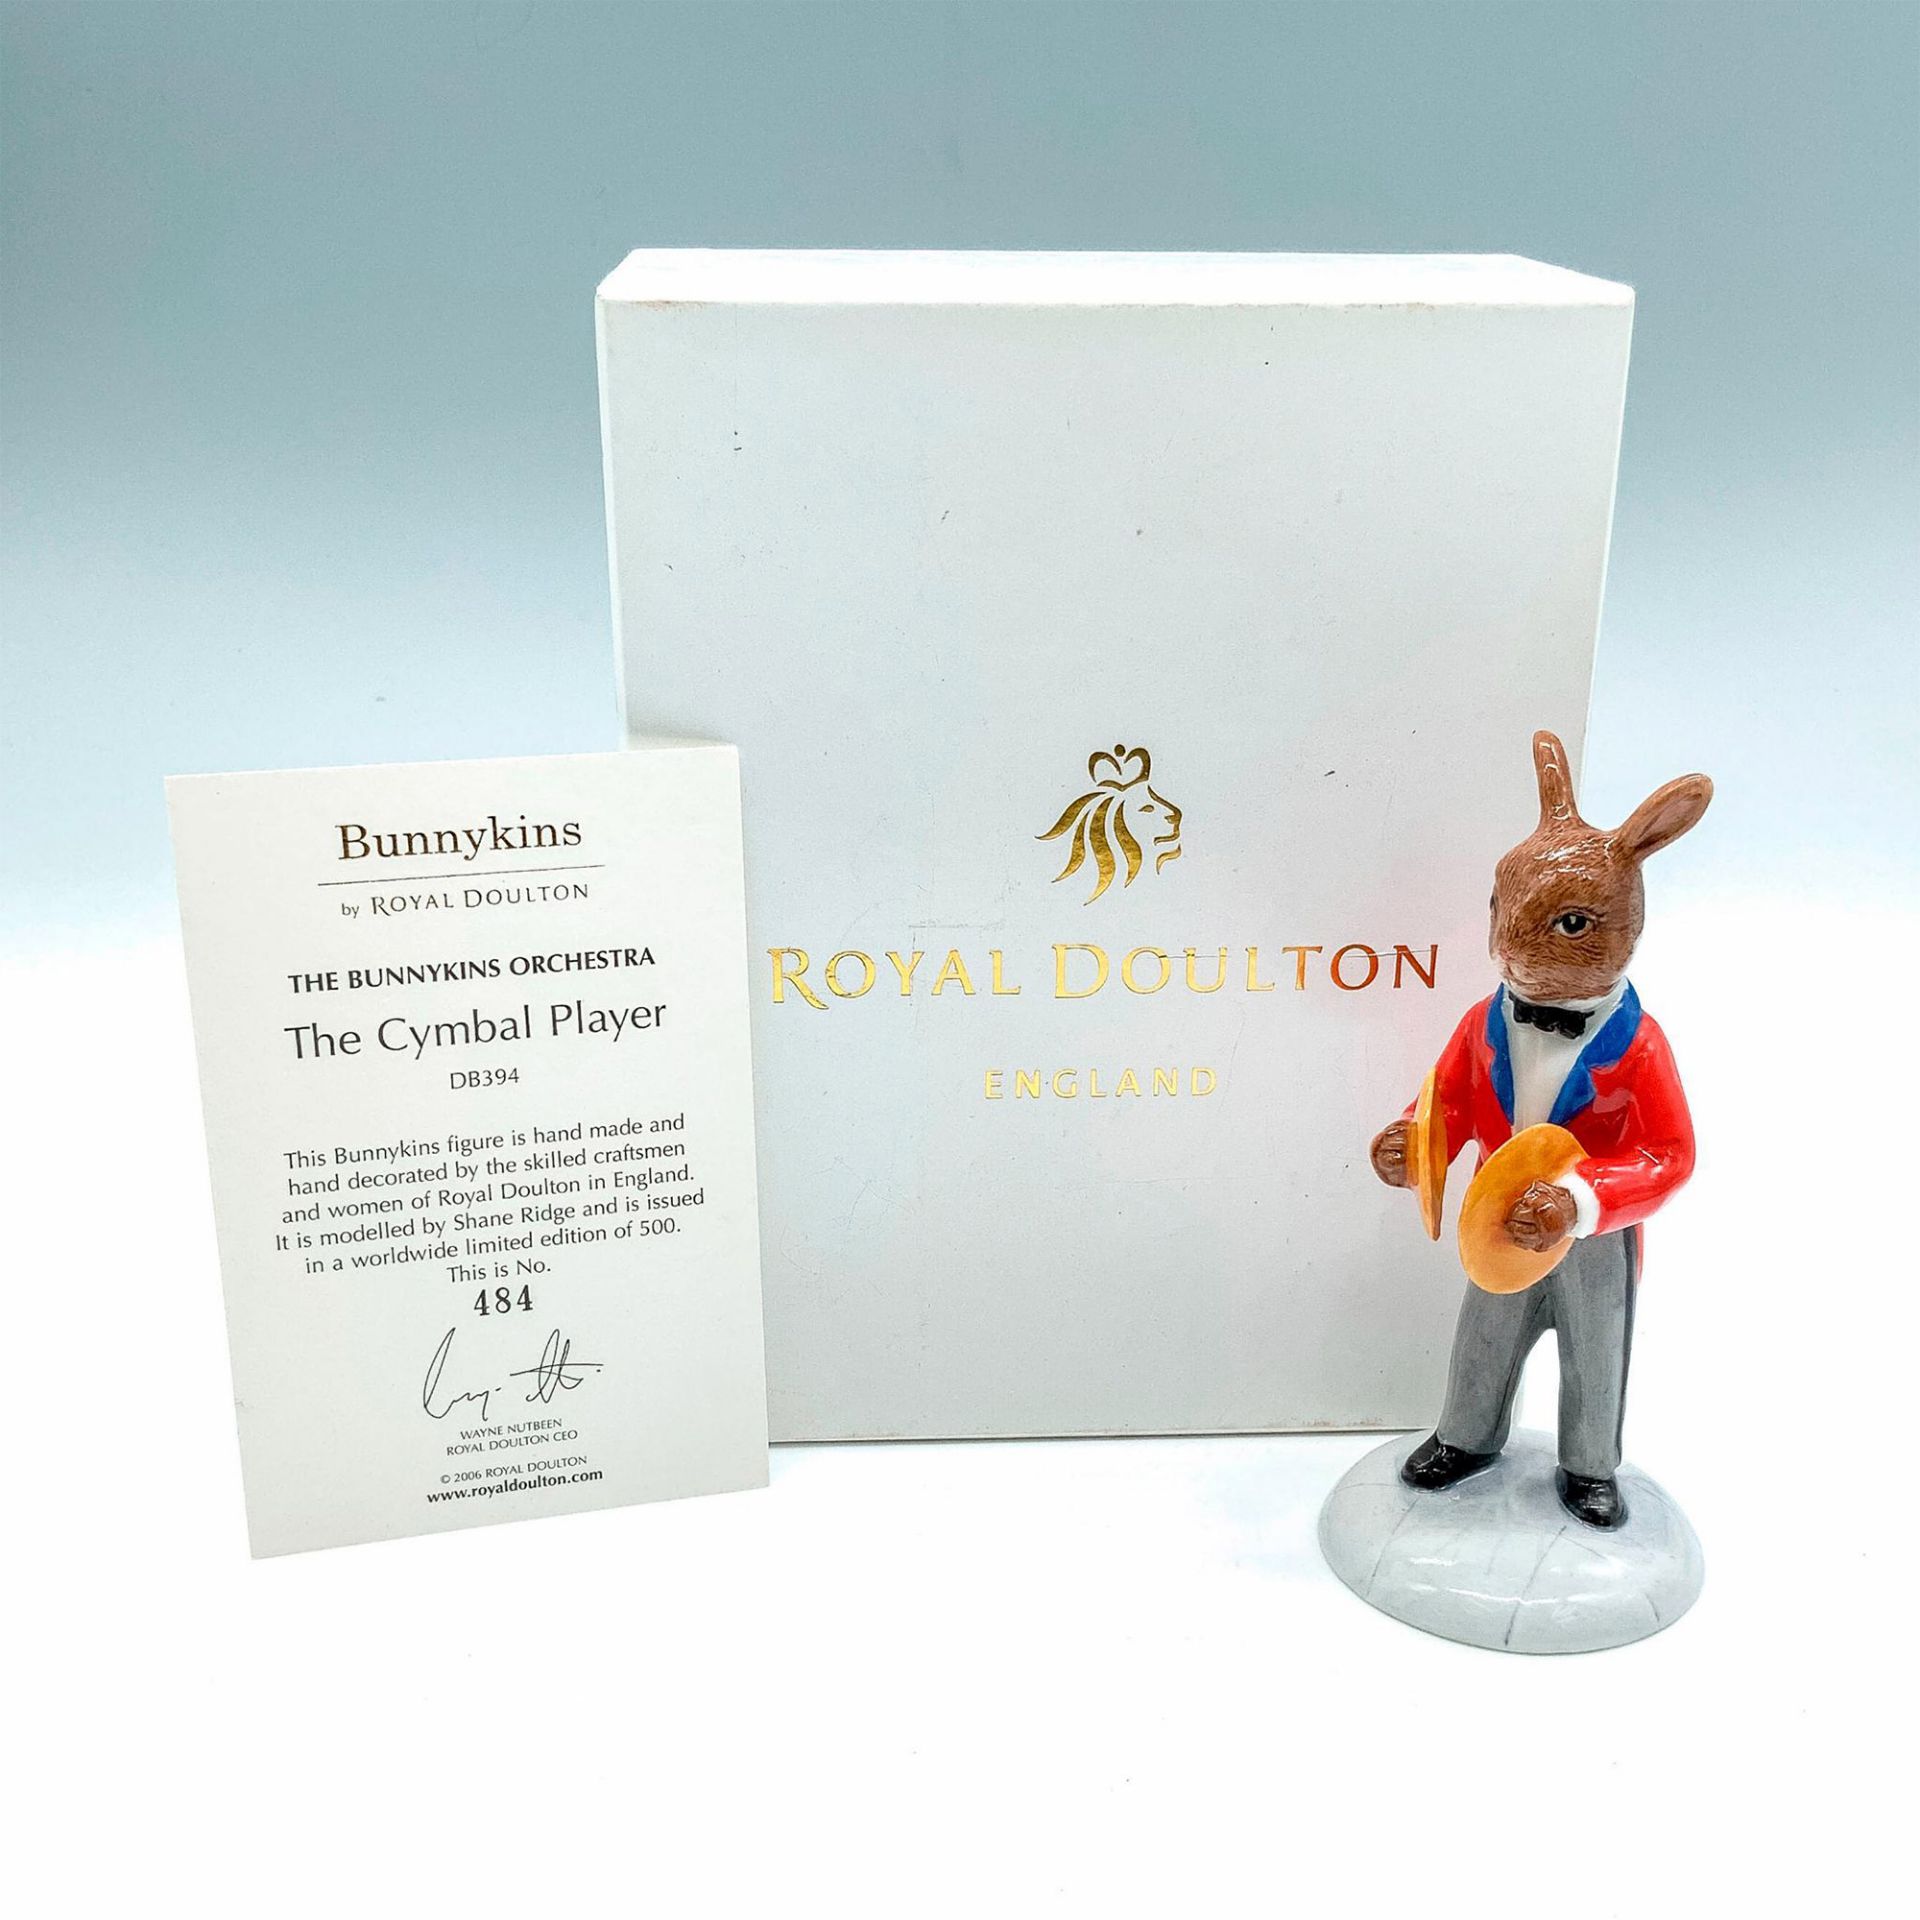 Royal Doulton Bunnykins LE Figurine, The Cymbal Player DB394 - Image 4 of 4